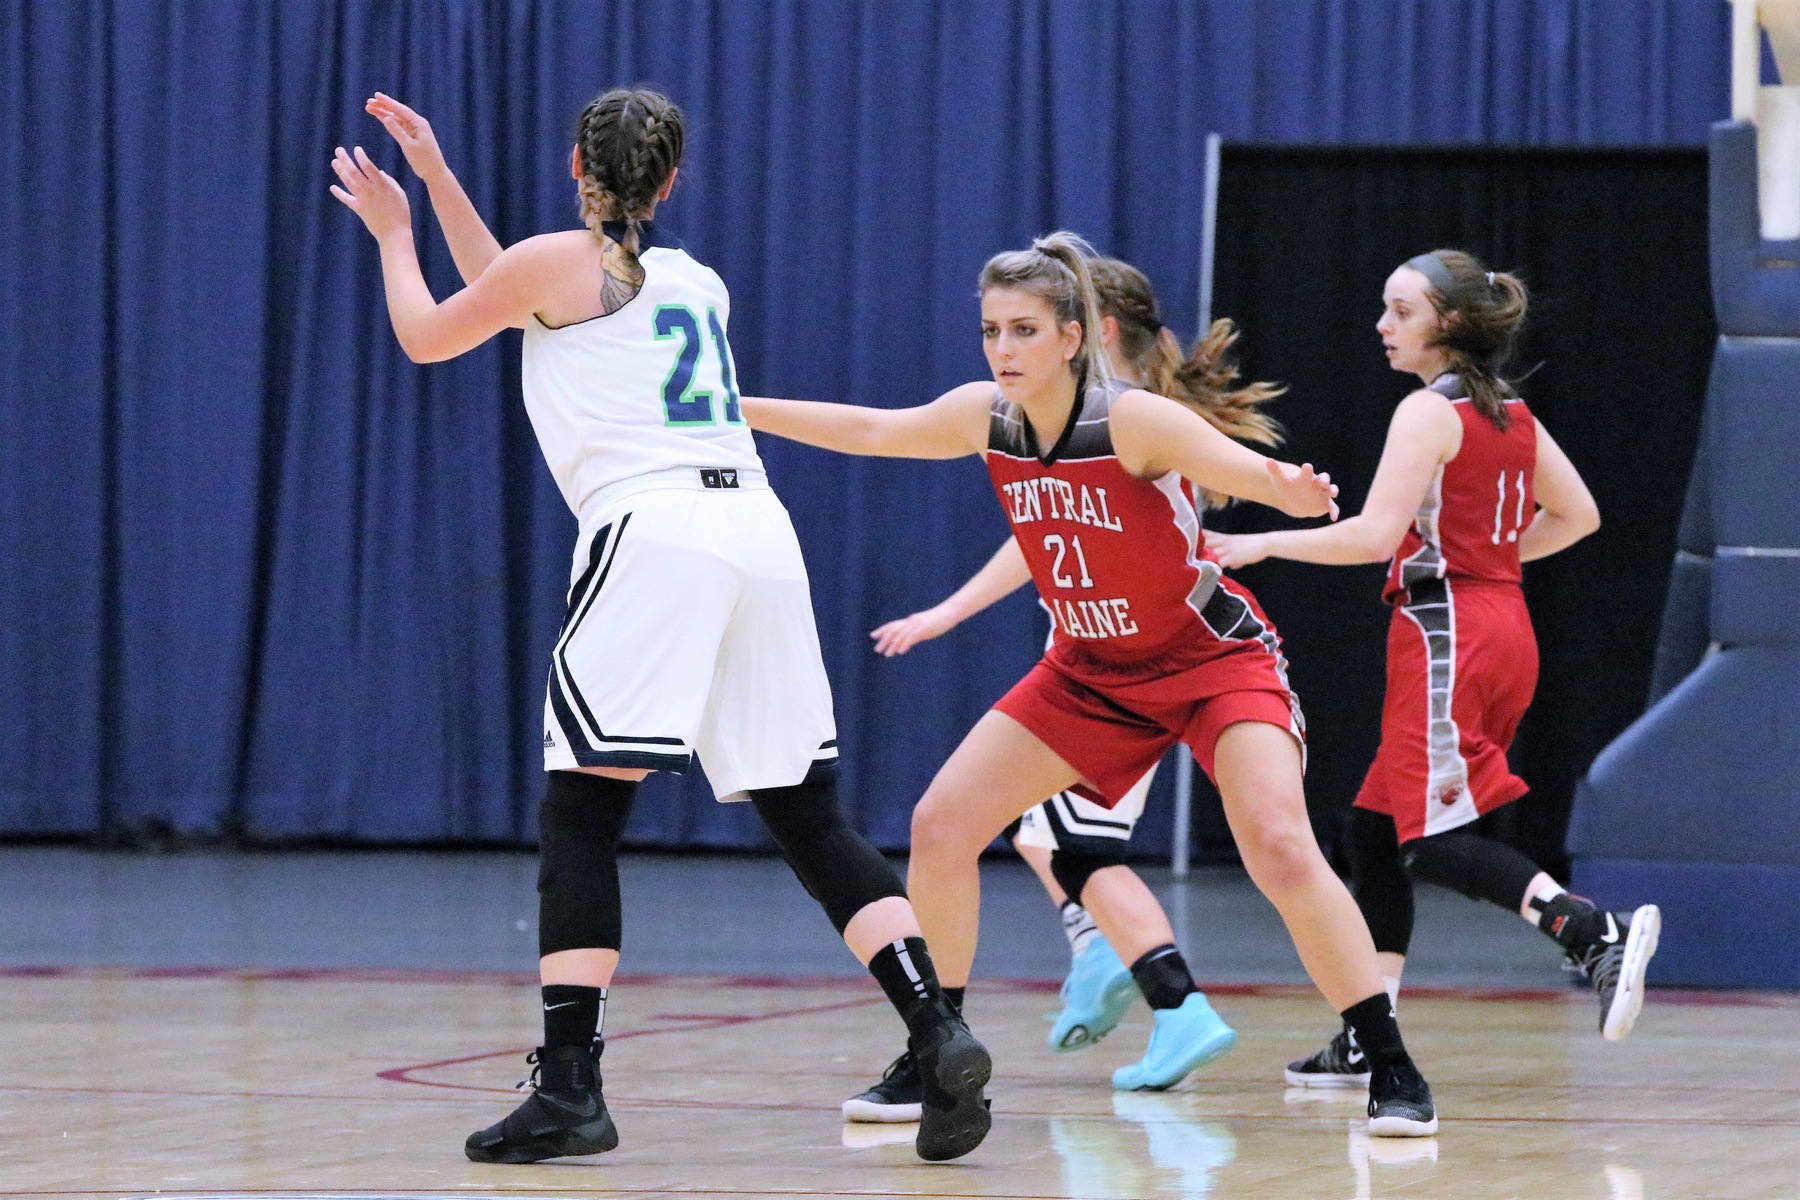 Rusty Lady Mustangs use late surge to beat CCRI